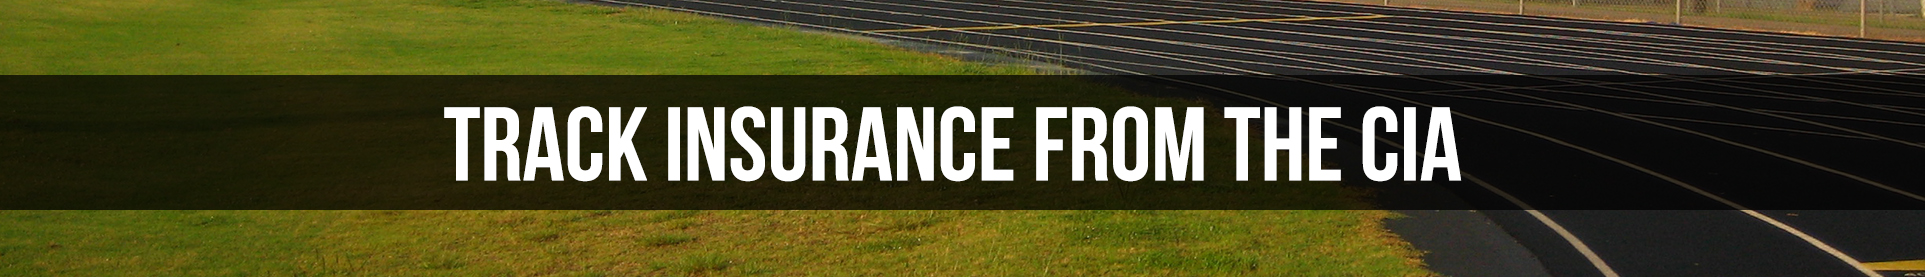 Insurance for Track & Cross Country from the CIA